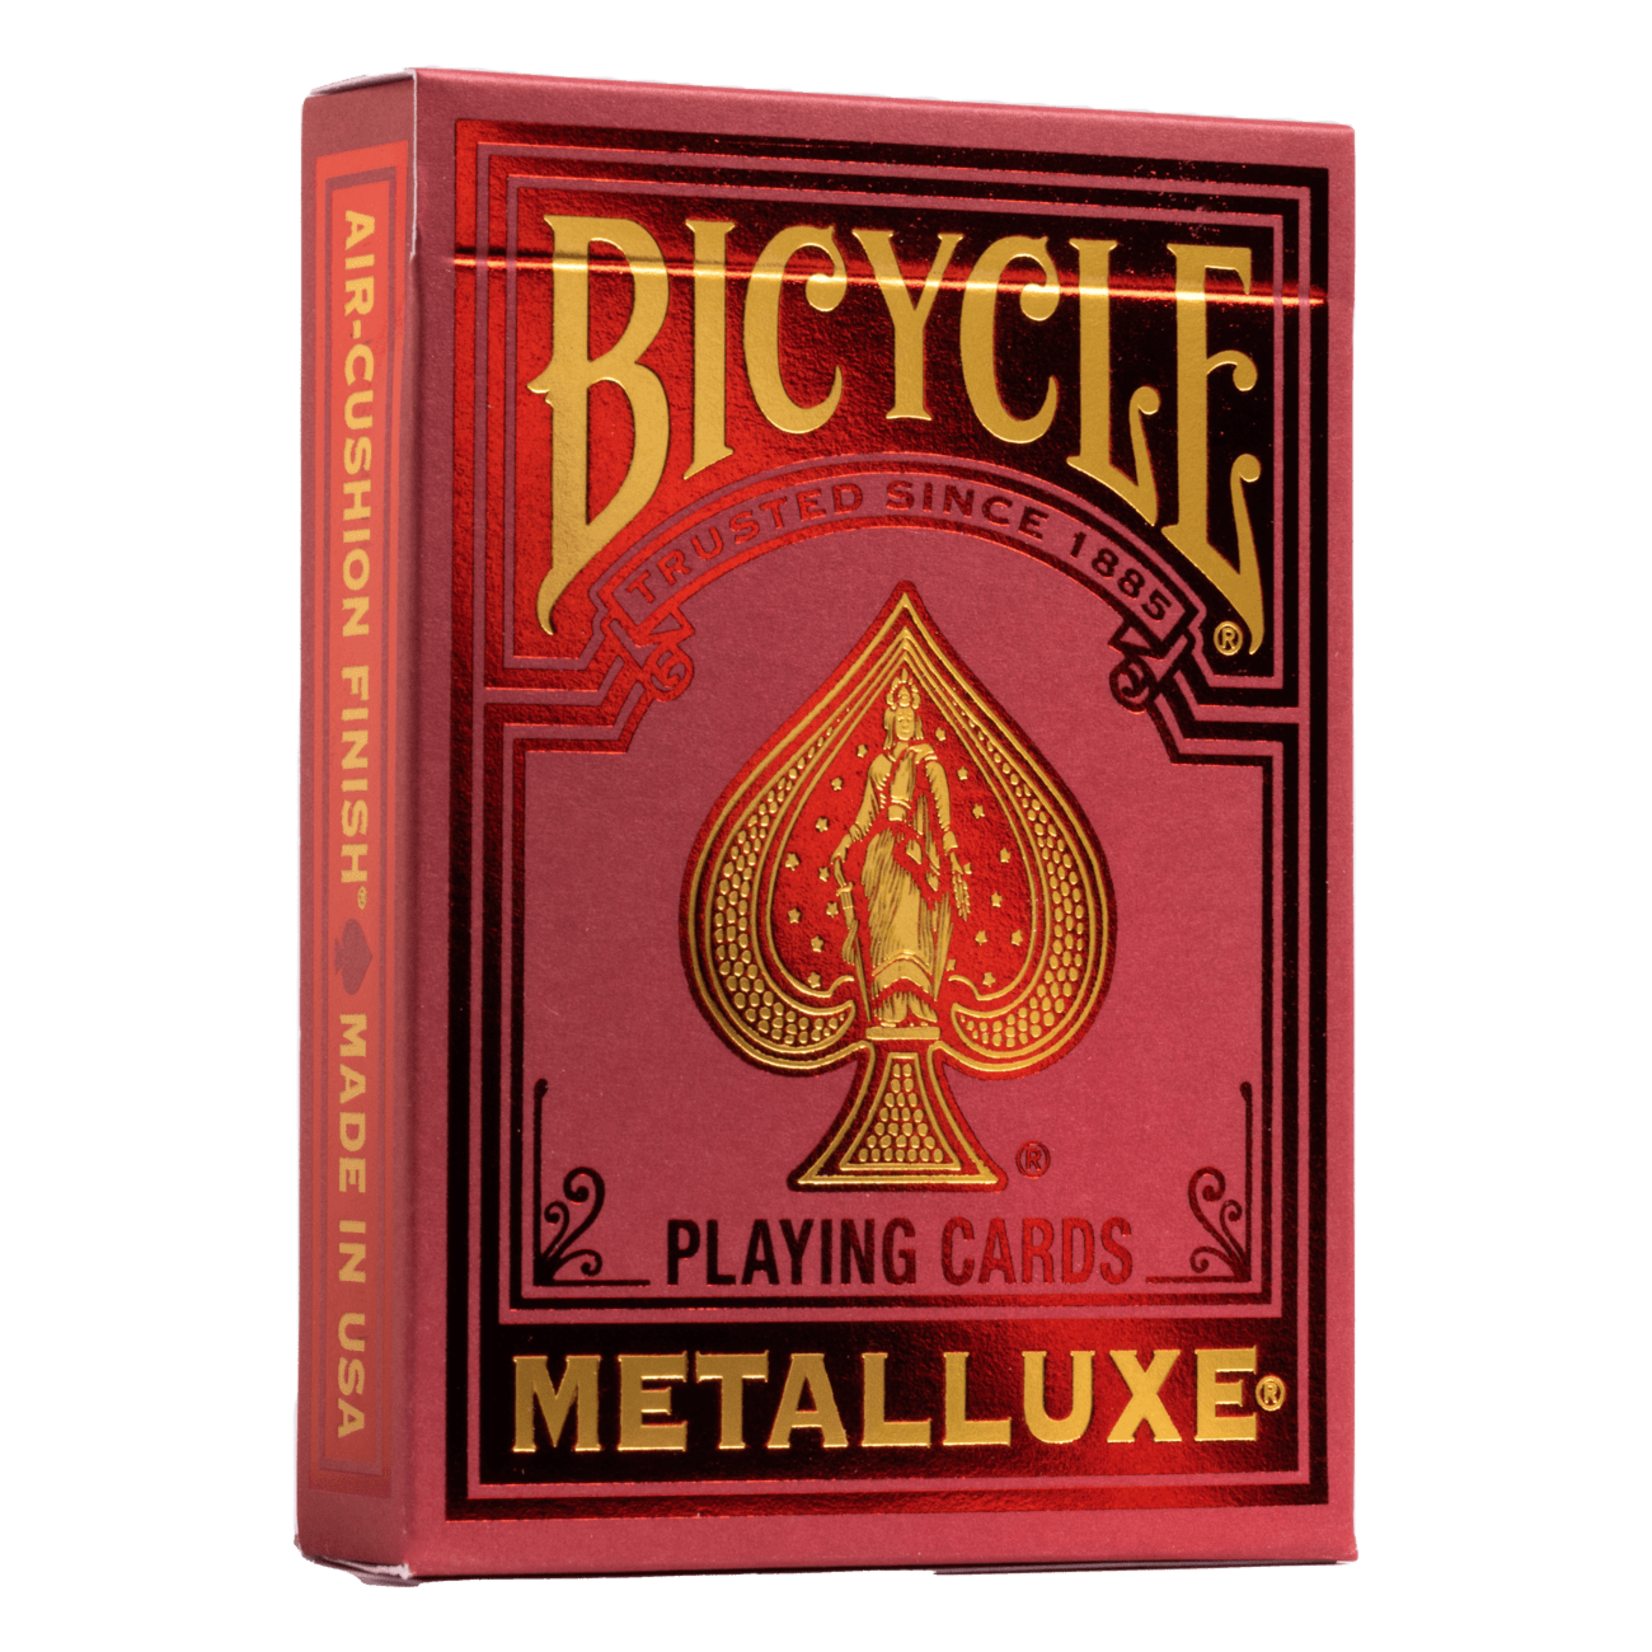 Bicycle Bicycle Metalluxe Red Playing Cards 2022